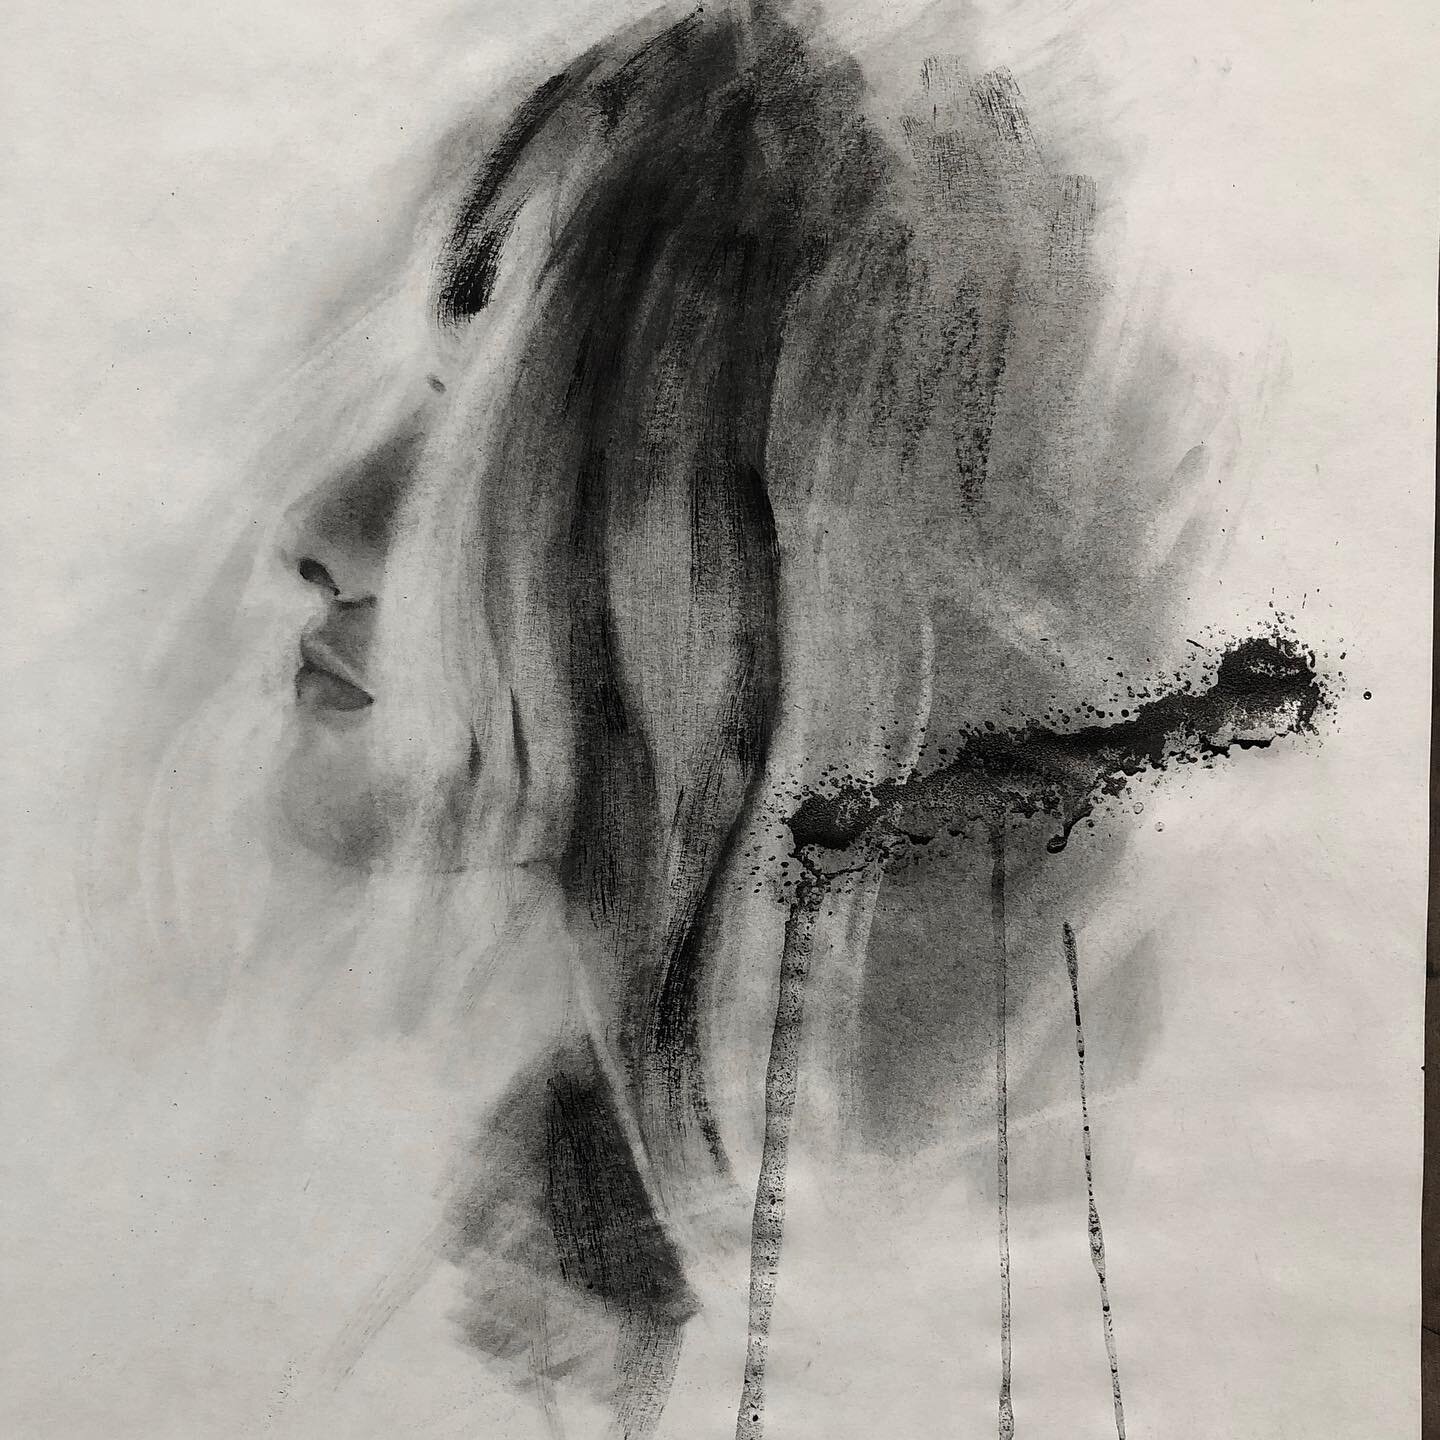 You are altogether beautiful, my darling, And there is no blemish in you.
Song of Solomon‬ ‭4:7‬ .
#art #artwork #artist #charcoal #portrait #charcoaldrawing #portraitdrawing #drawing #charcoalonpaper #figurativeartist #calledtocreate #kc #kcmo #kans